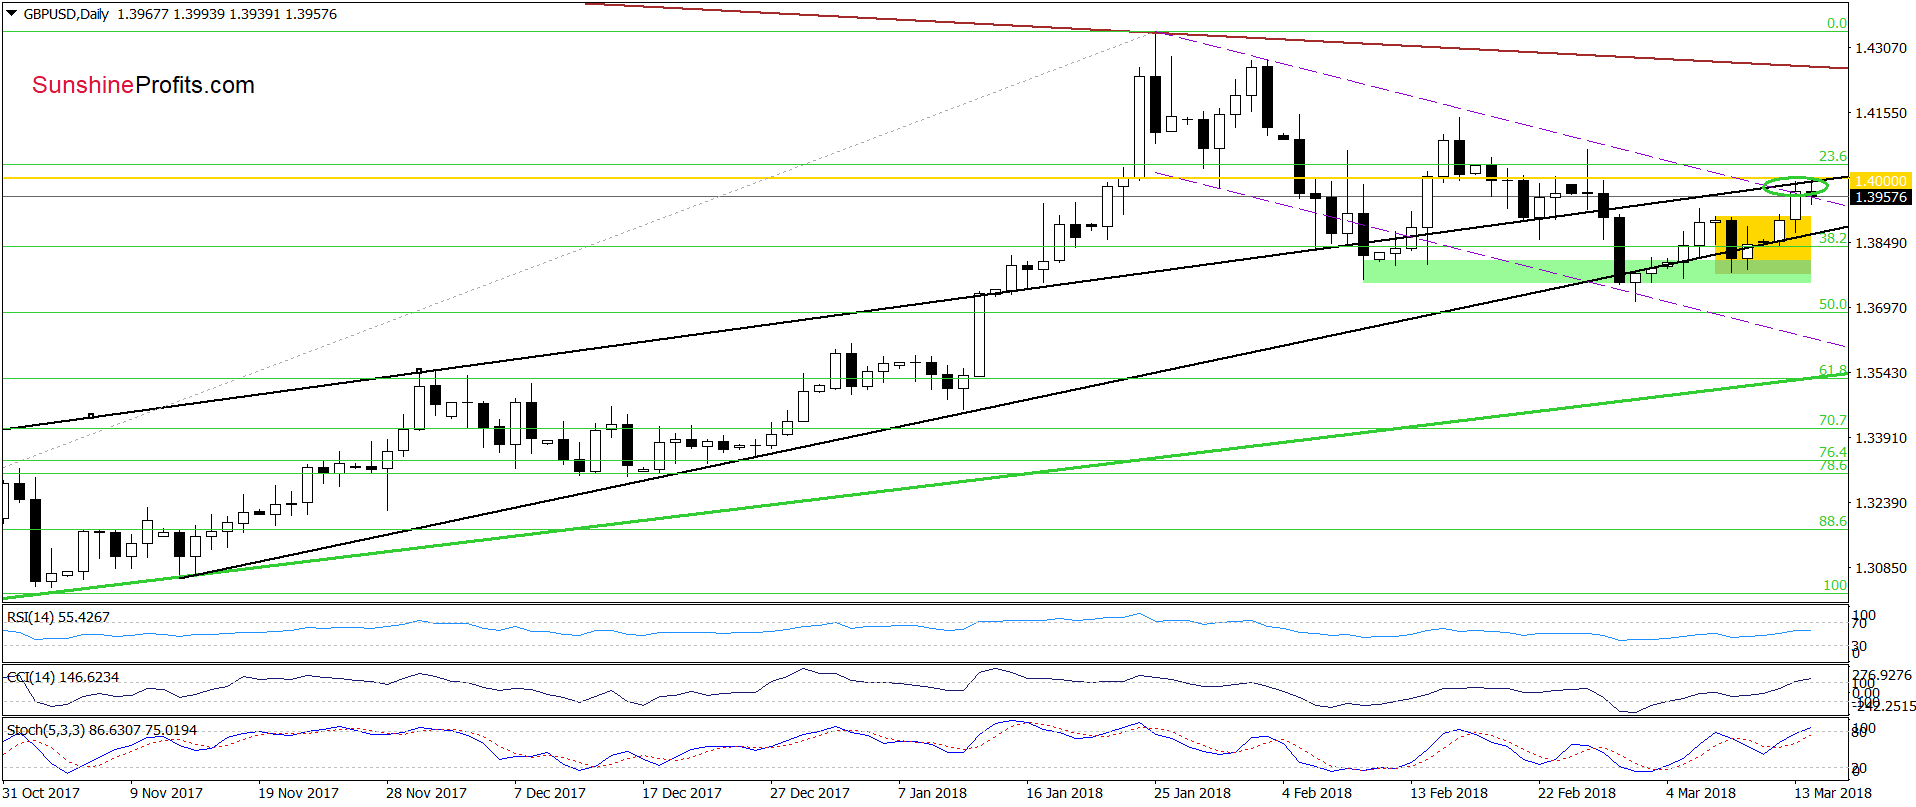 GBP/USD - the daily chart